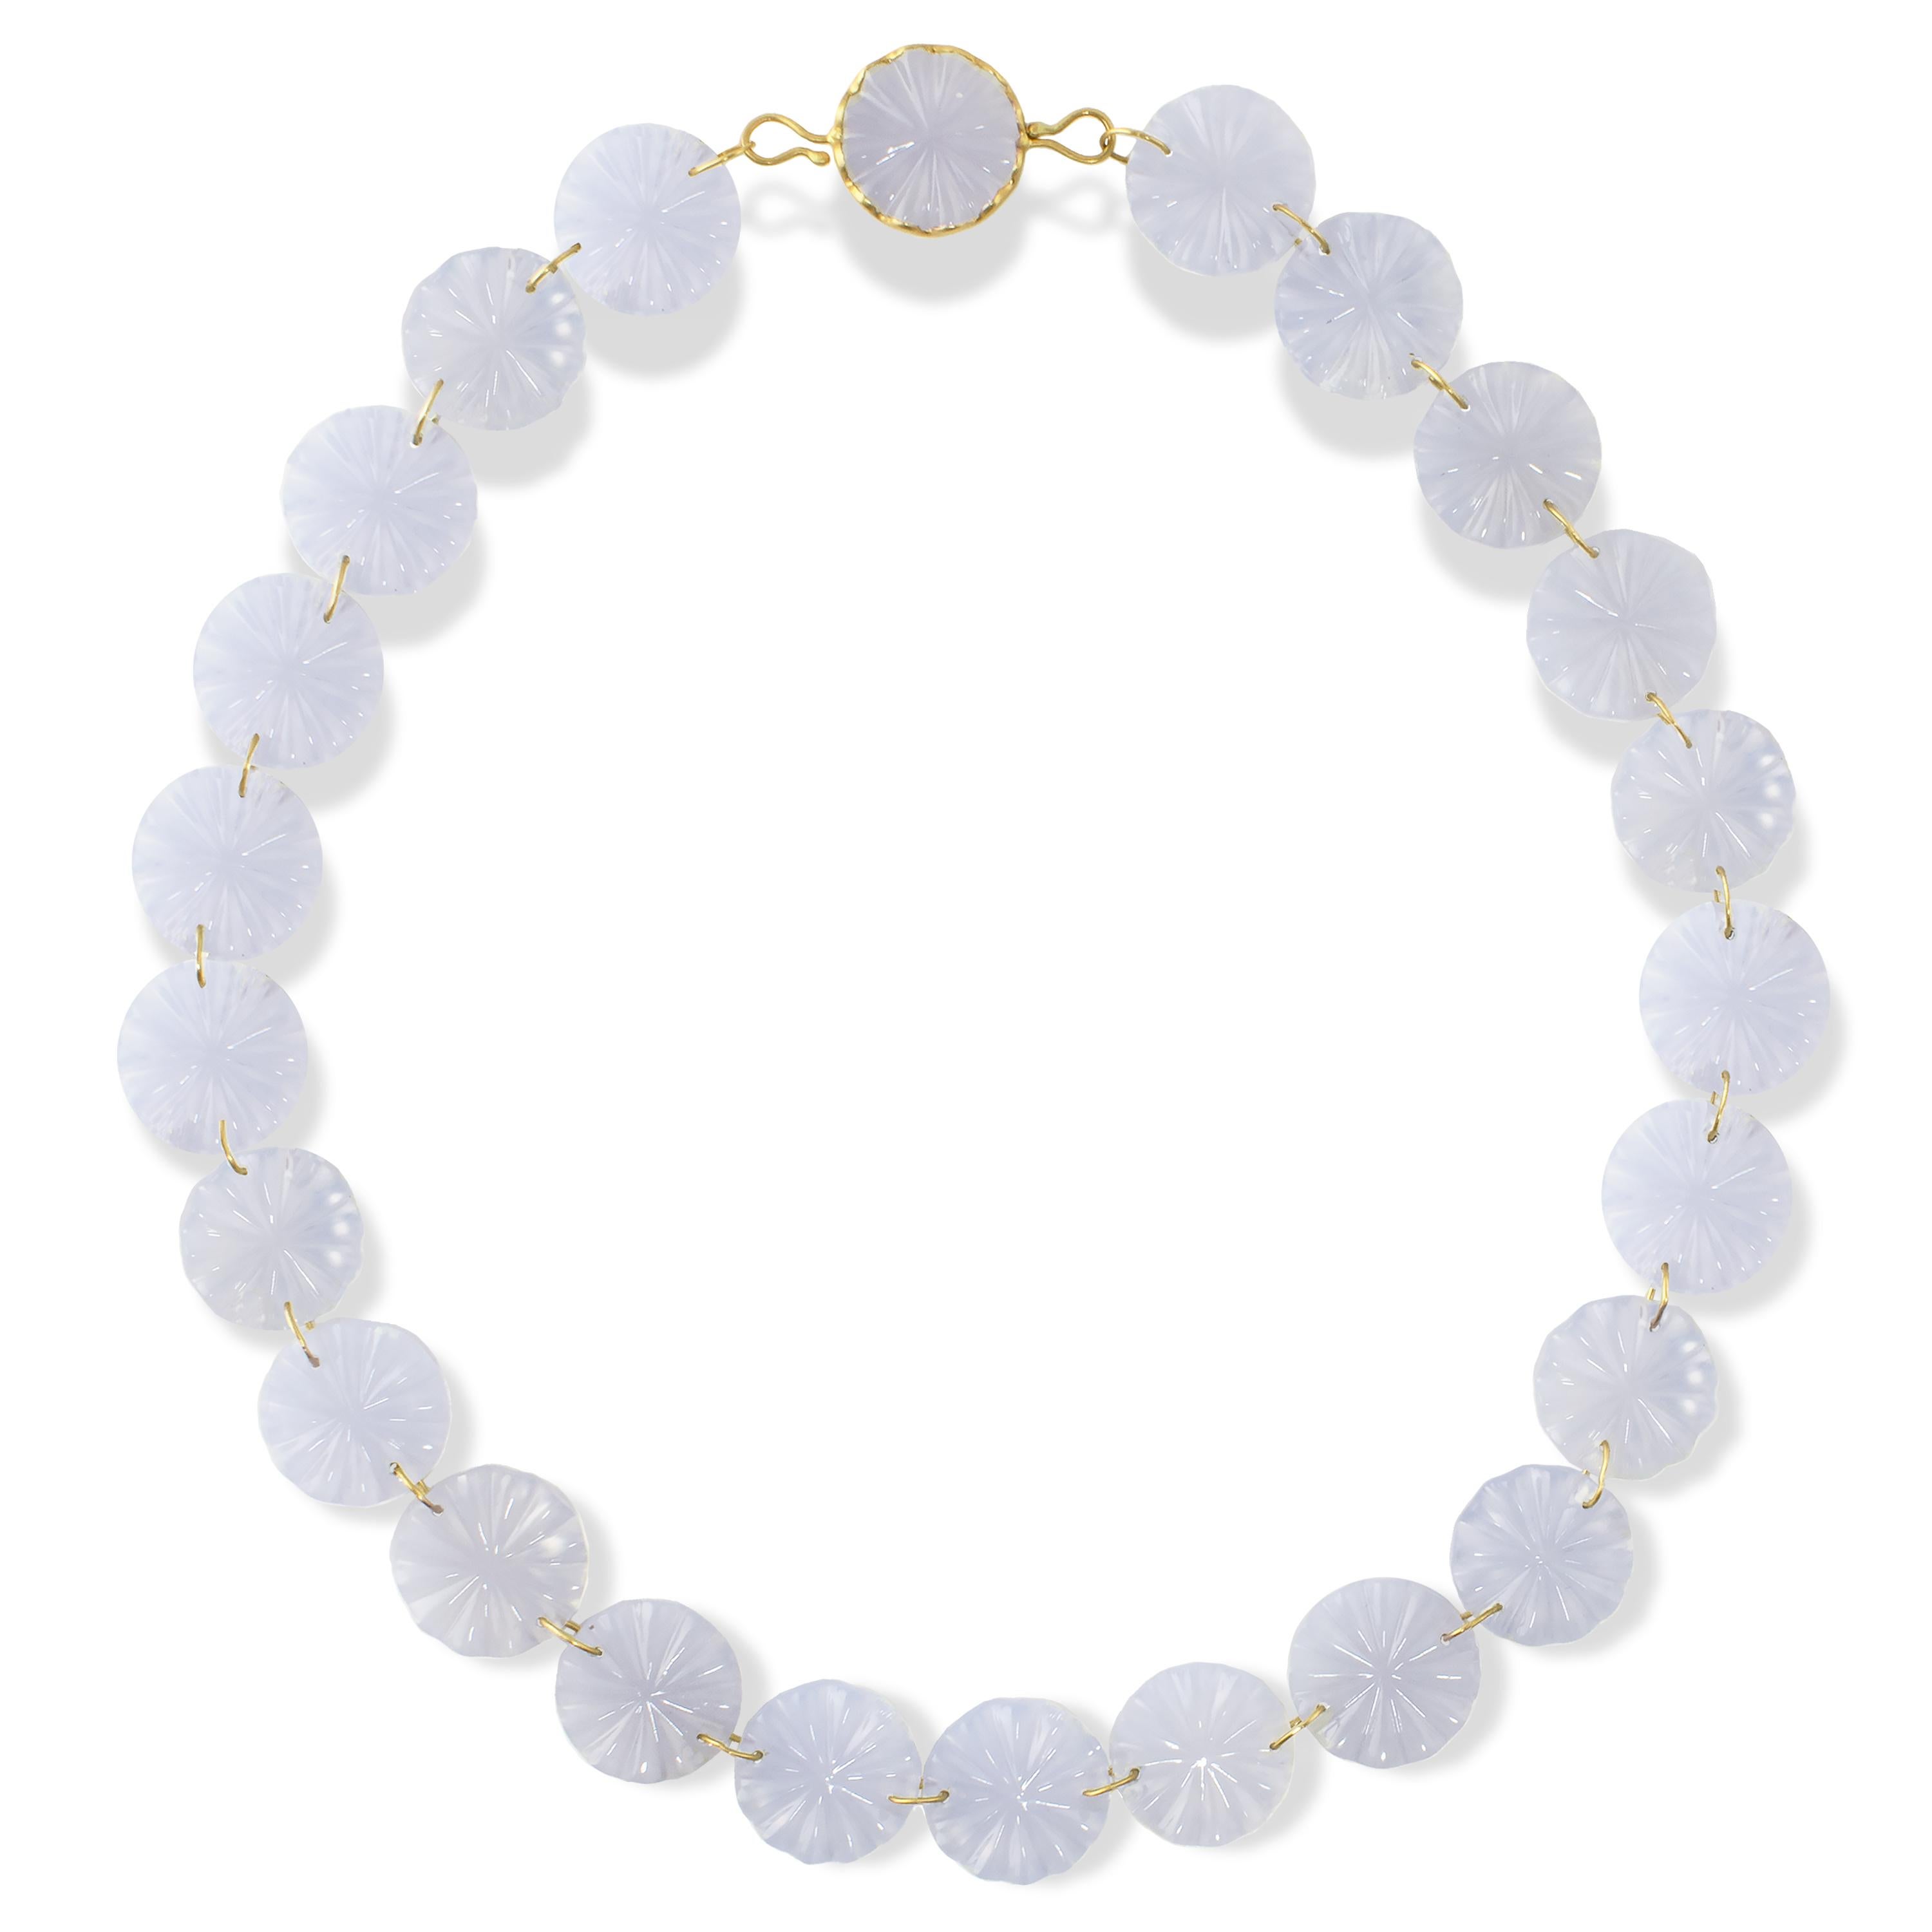 A dreamy necklace made of 255 carats of hand carved natural blue Chalcedony discs.  Made as part of Ico & the Bird's 'Ocean Collection,' the necklace is composed of jump rings connecting the discs and completed with a disk set in a wavy bezel with a